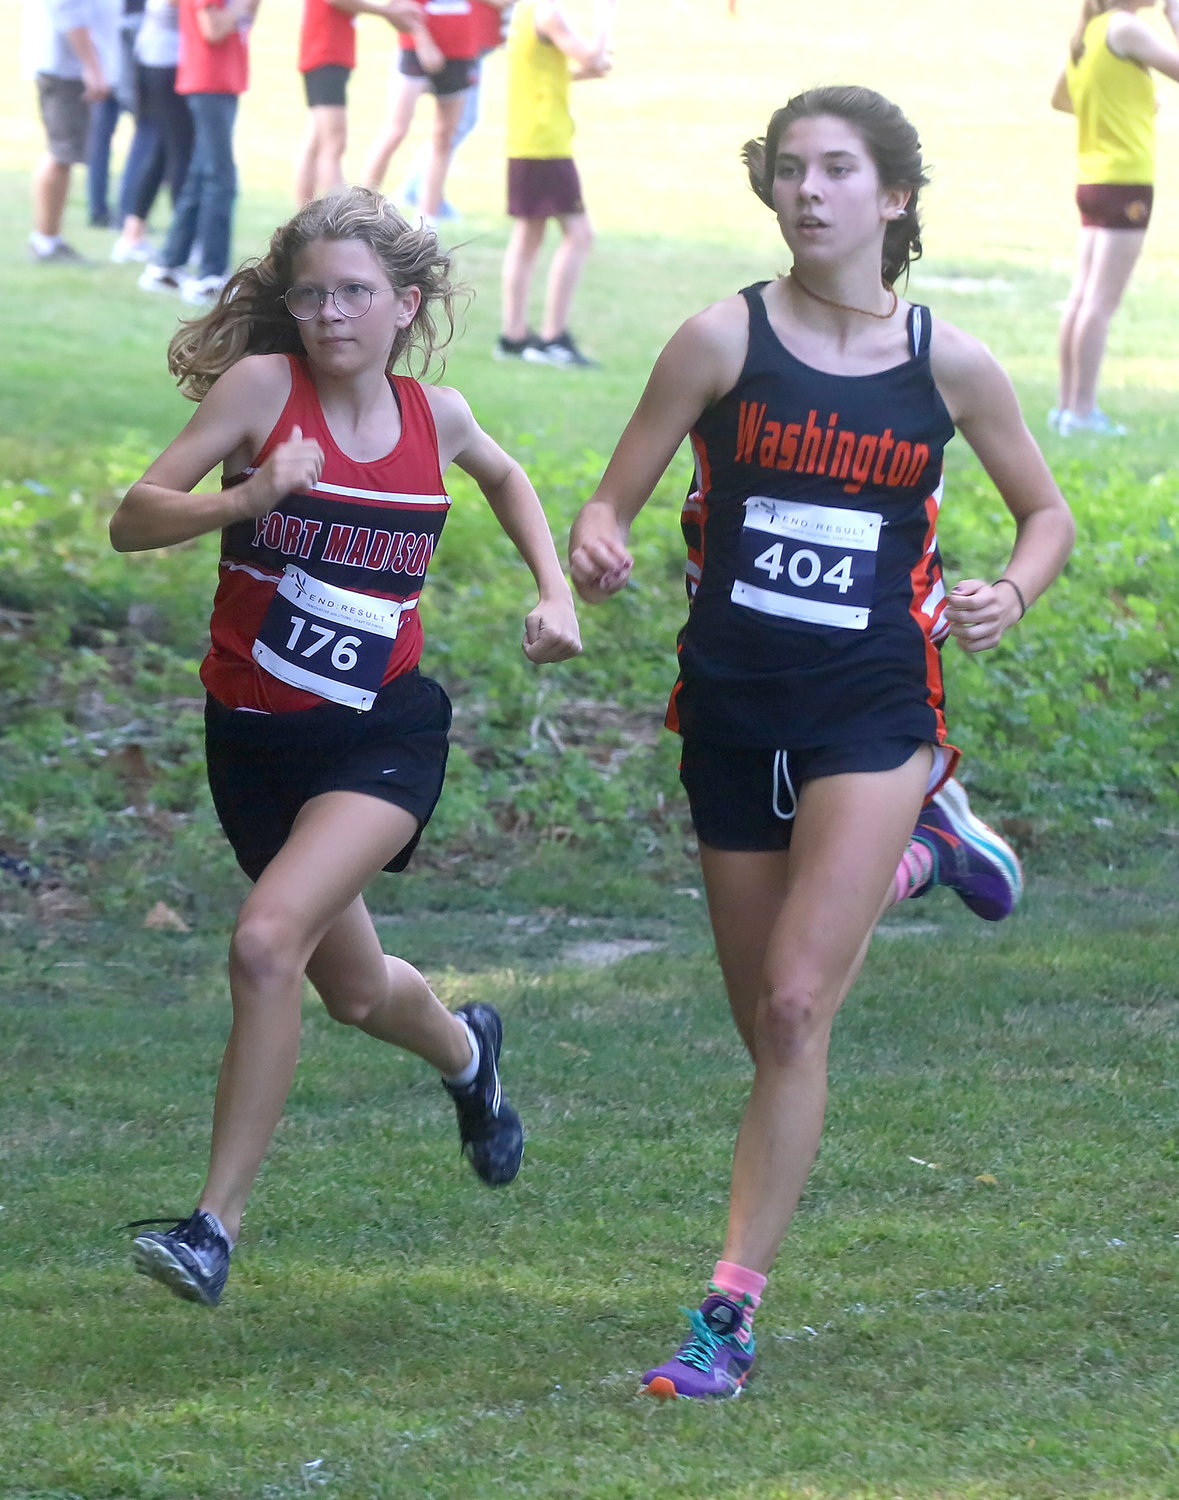 Fort Madison freshman Avery Rump, left, battles with Washington freshman Iris Dahl in the early going of the Timm Lamb Cross Country Invitational Thursday afternoon at Rodeo Park in Fort Madison. The two runners would finish 1st and 2nd, respectively.